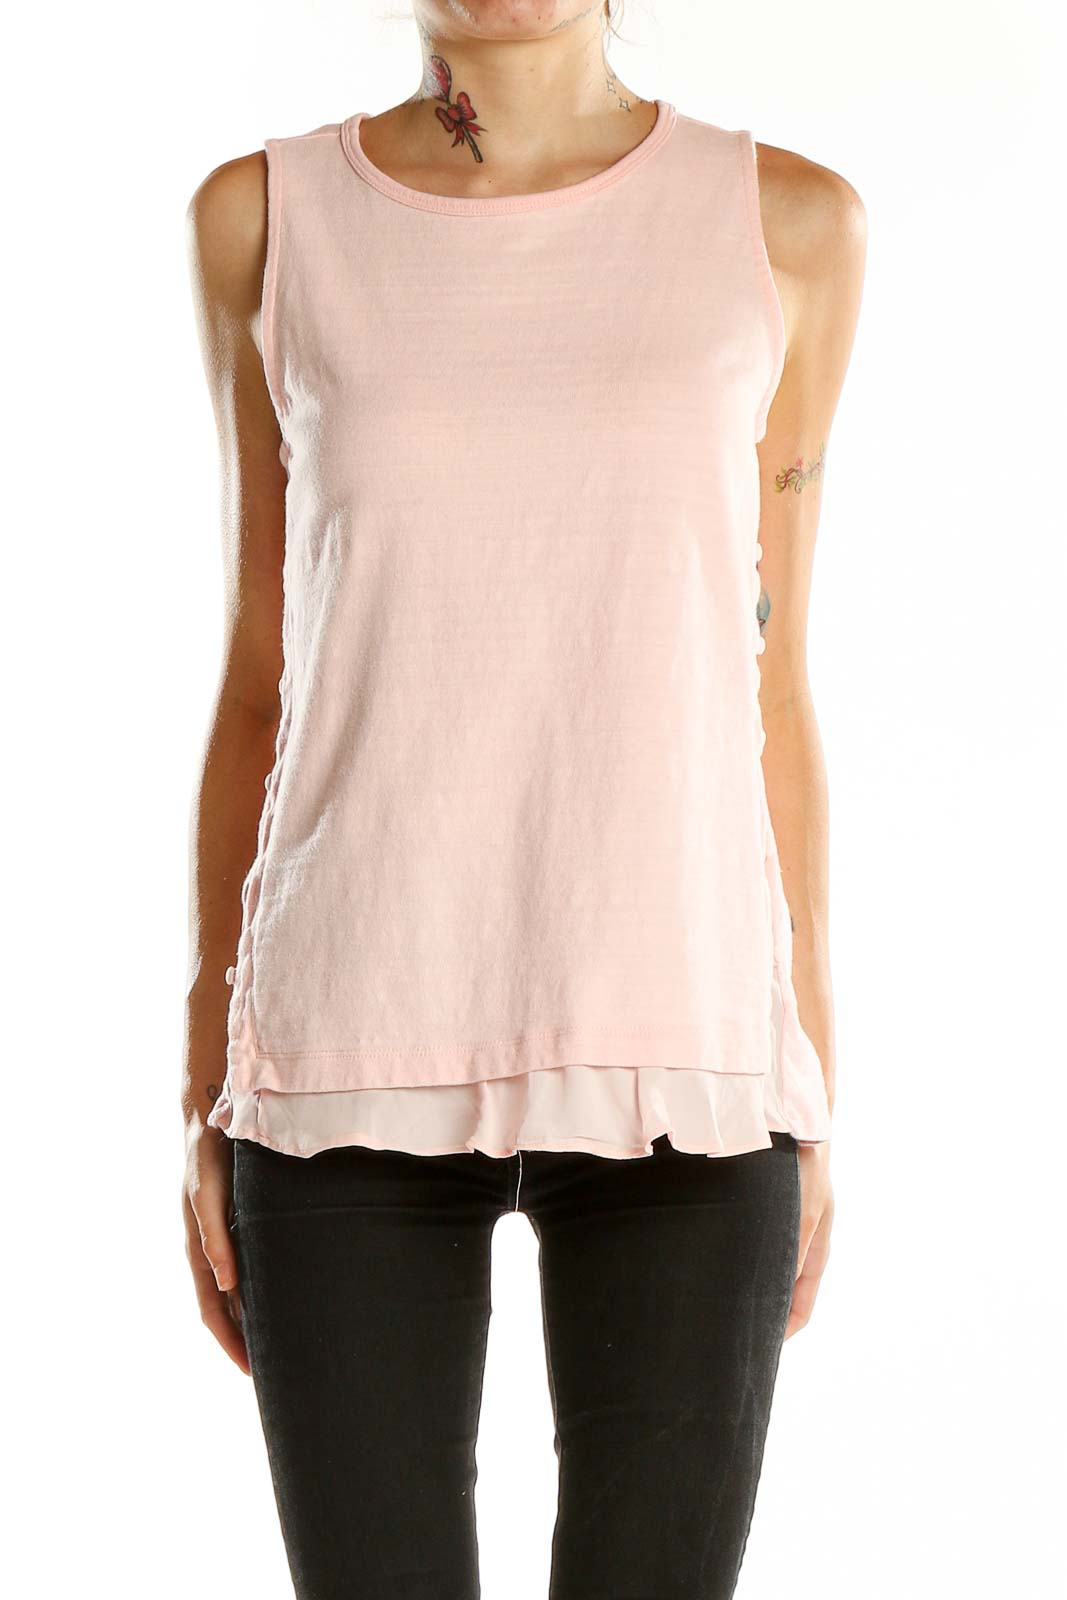 Pink Layered Top Front